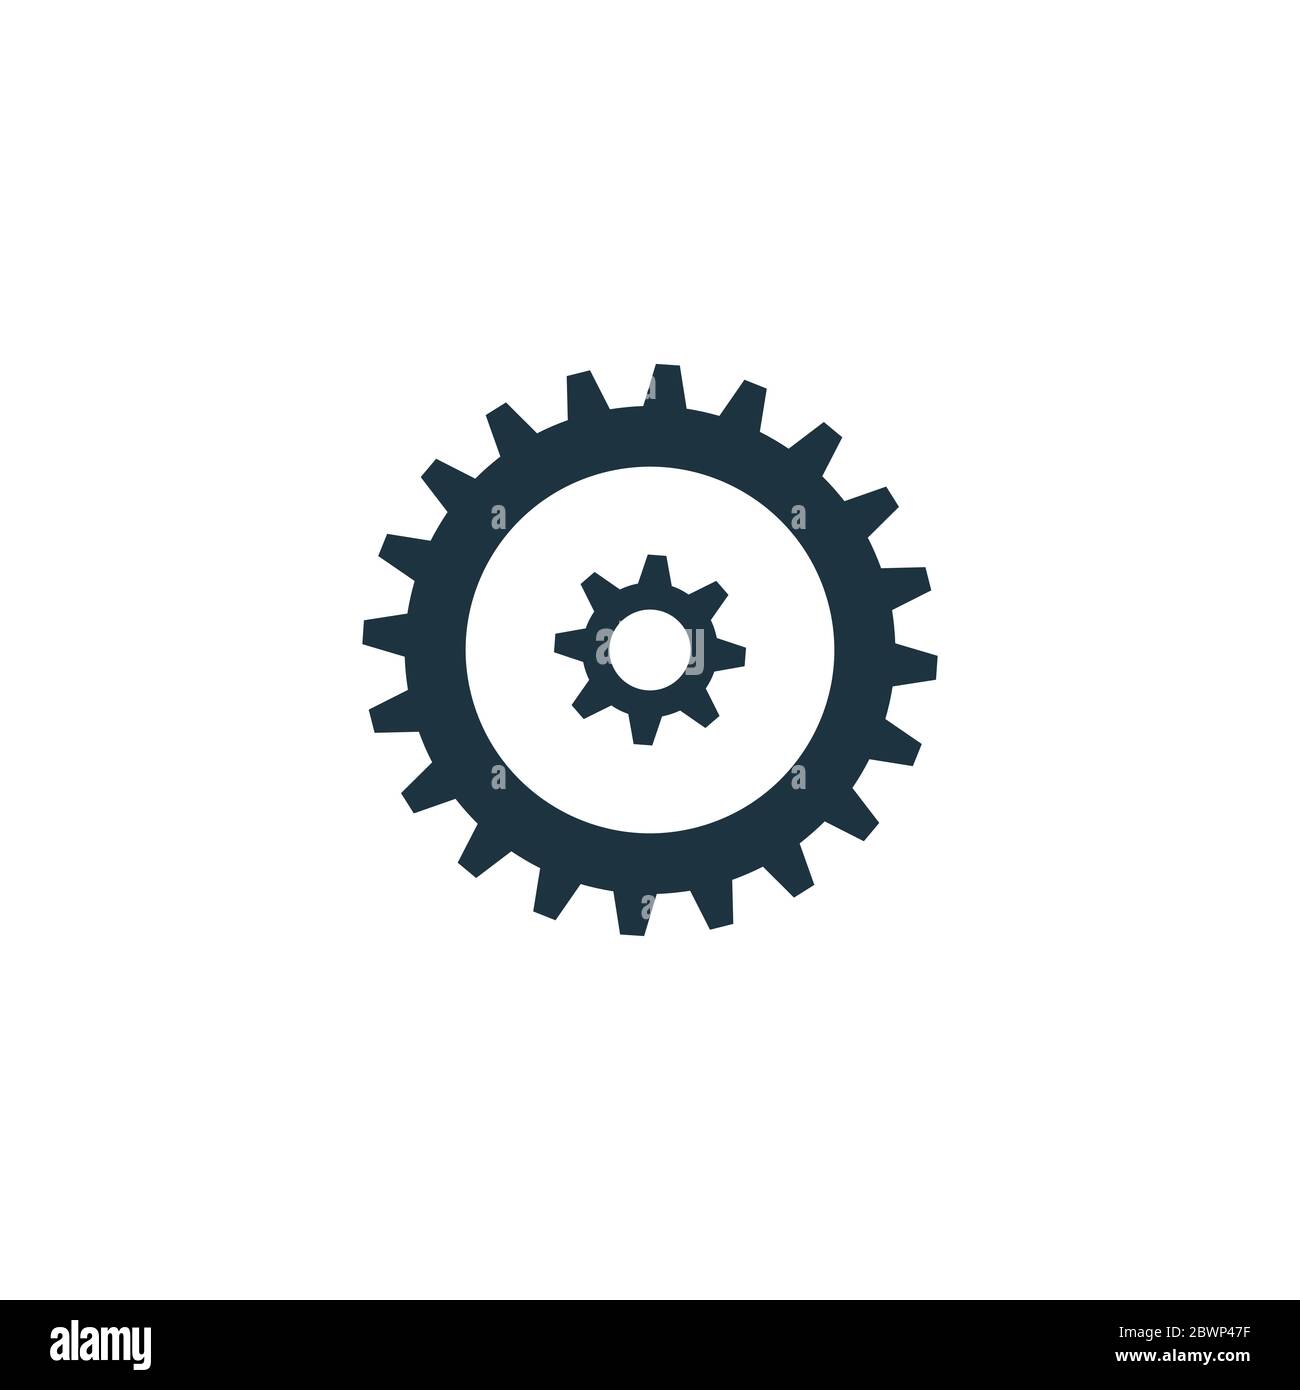 Double cog gear, mechanism element. Stock vector illustration isolated on white background. Stock Vector